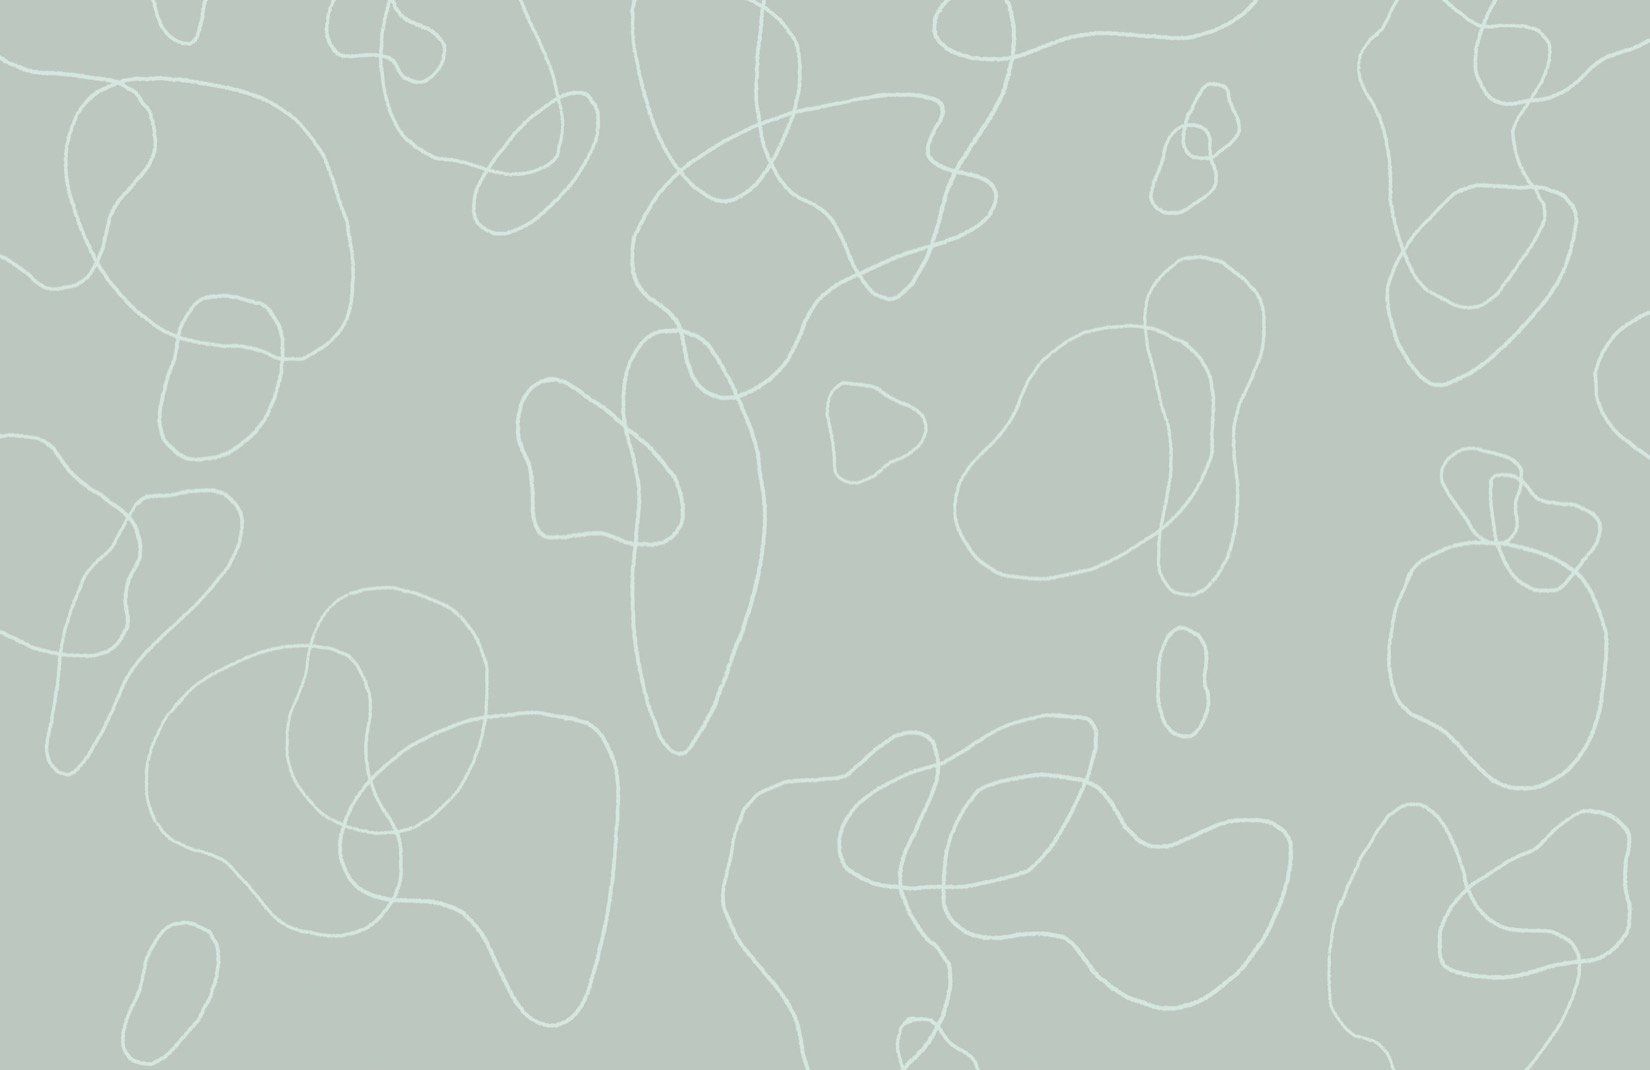 An abstract pattern of squiggly lines in white on a pale grey background - Abstract